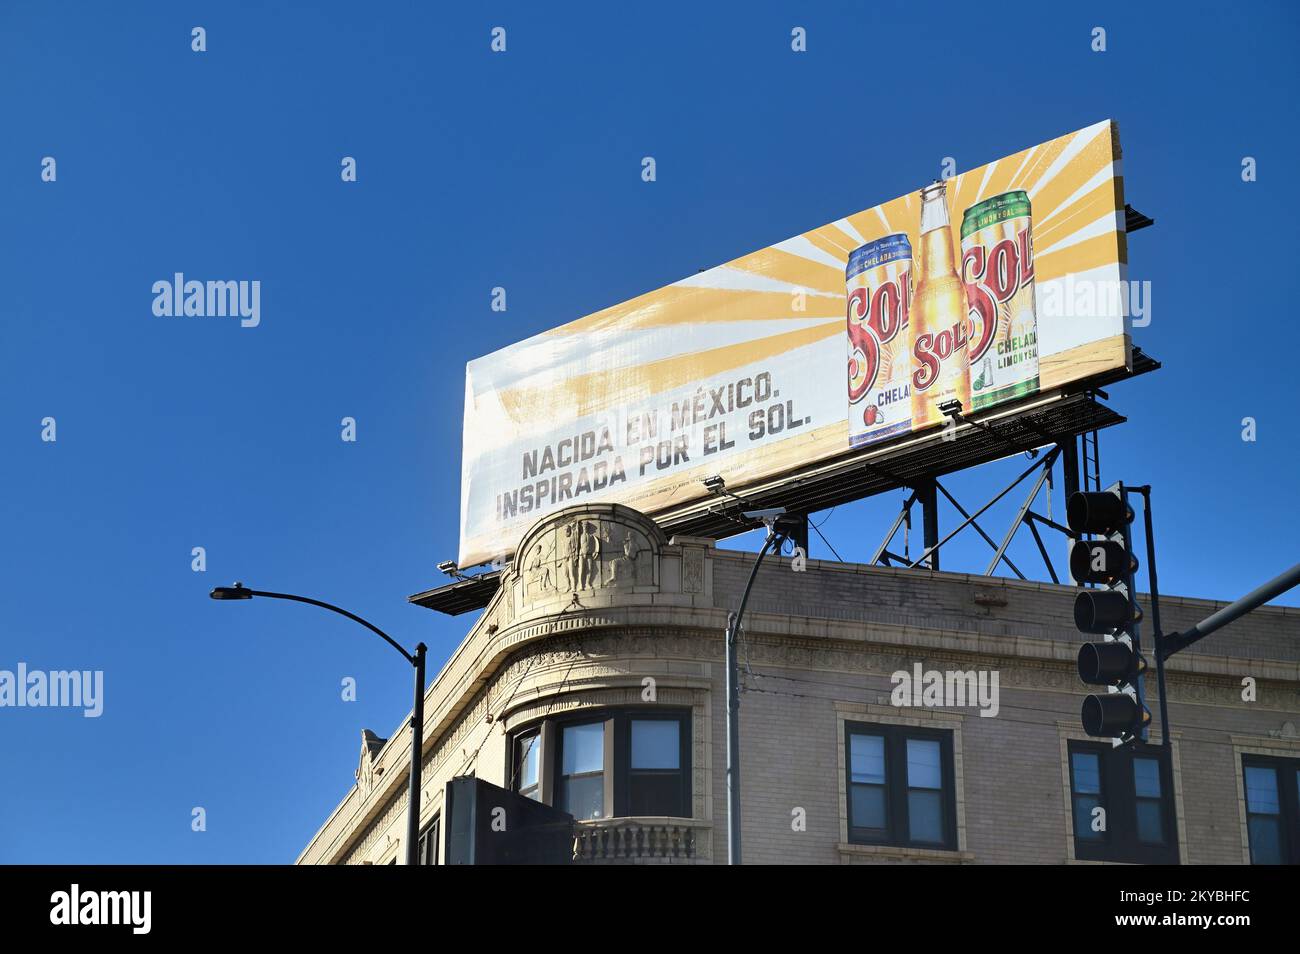 Chicago, Illinois, USA. A billboard on a roof top advertising a Mexican beer in Spanish. Stock Photo